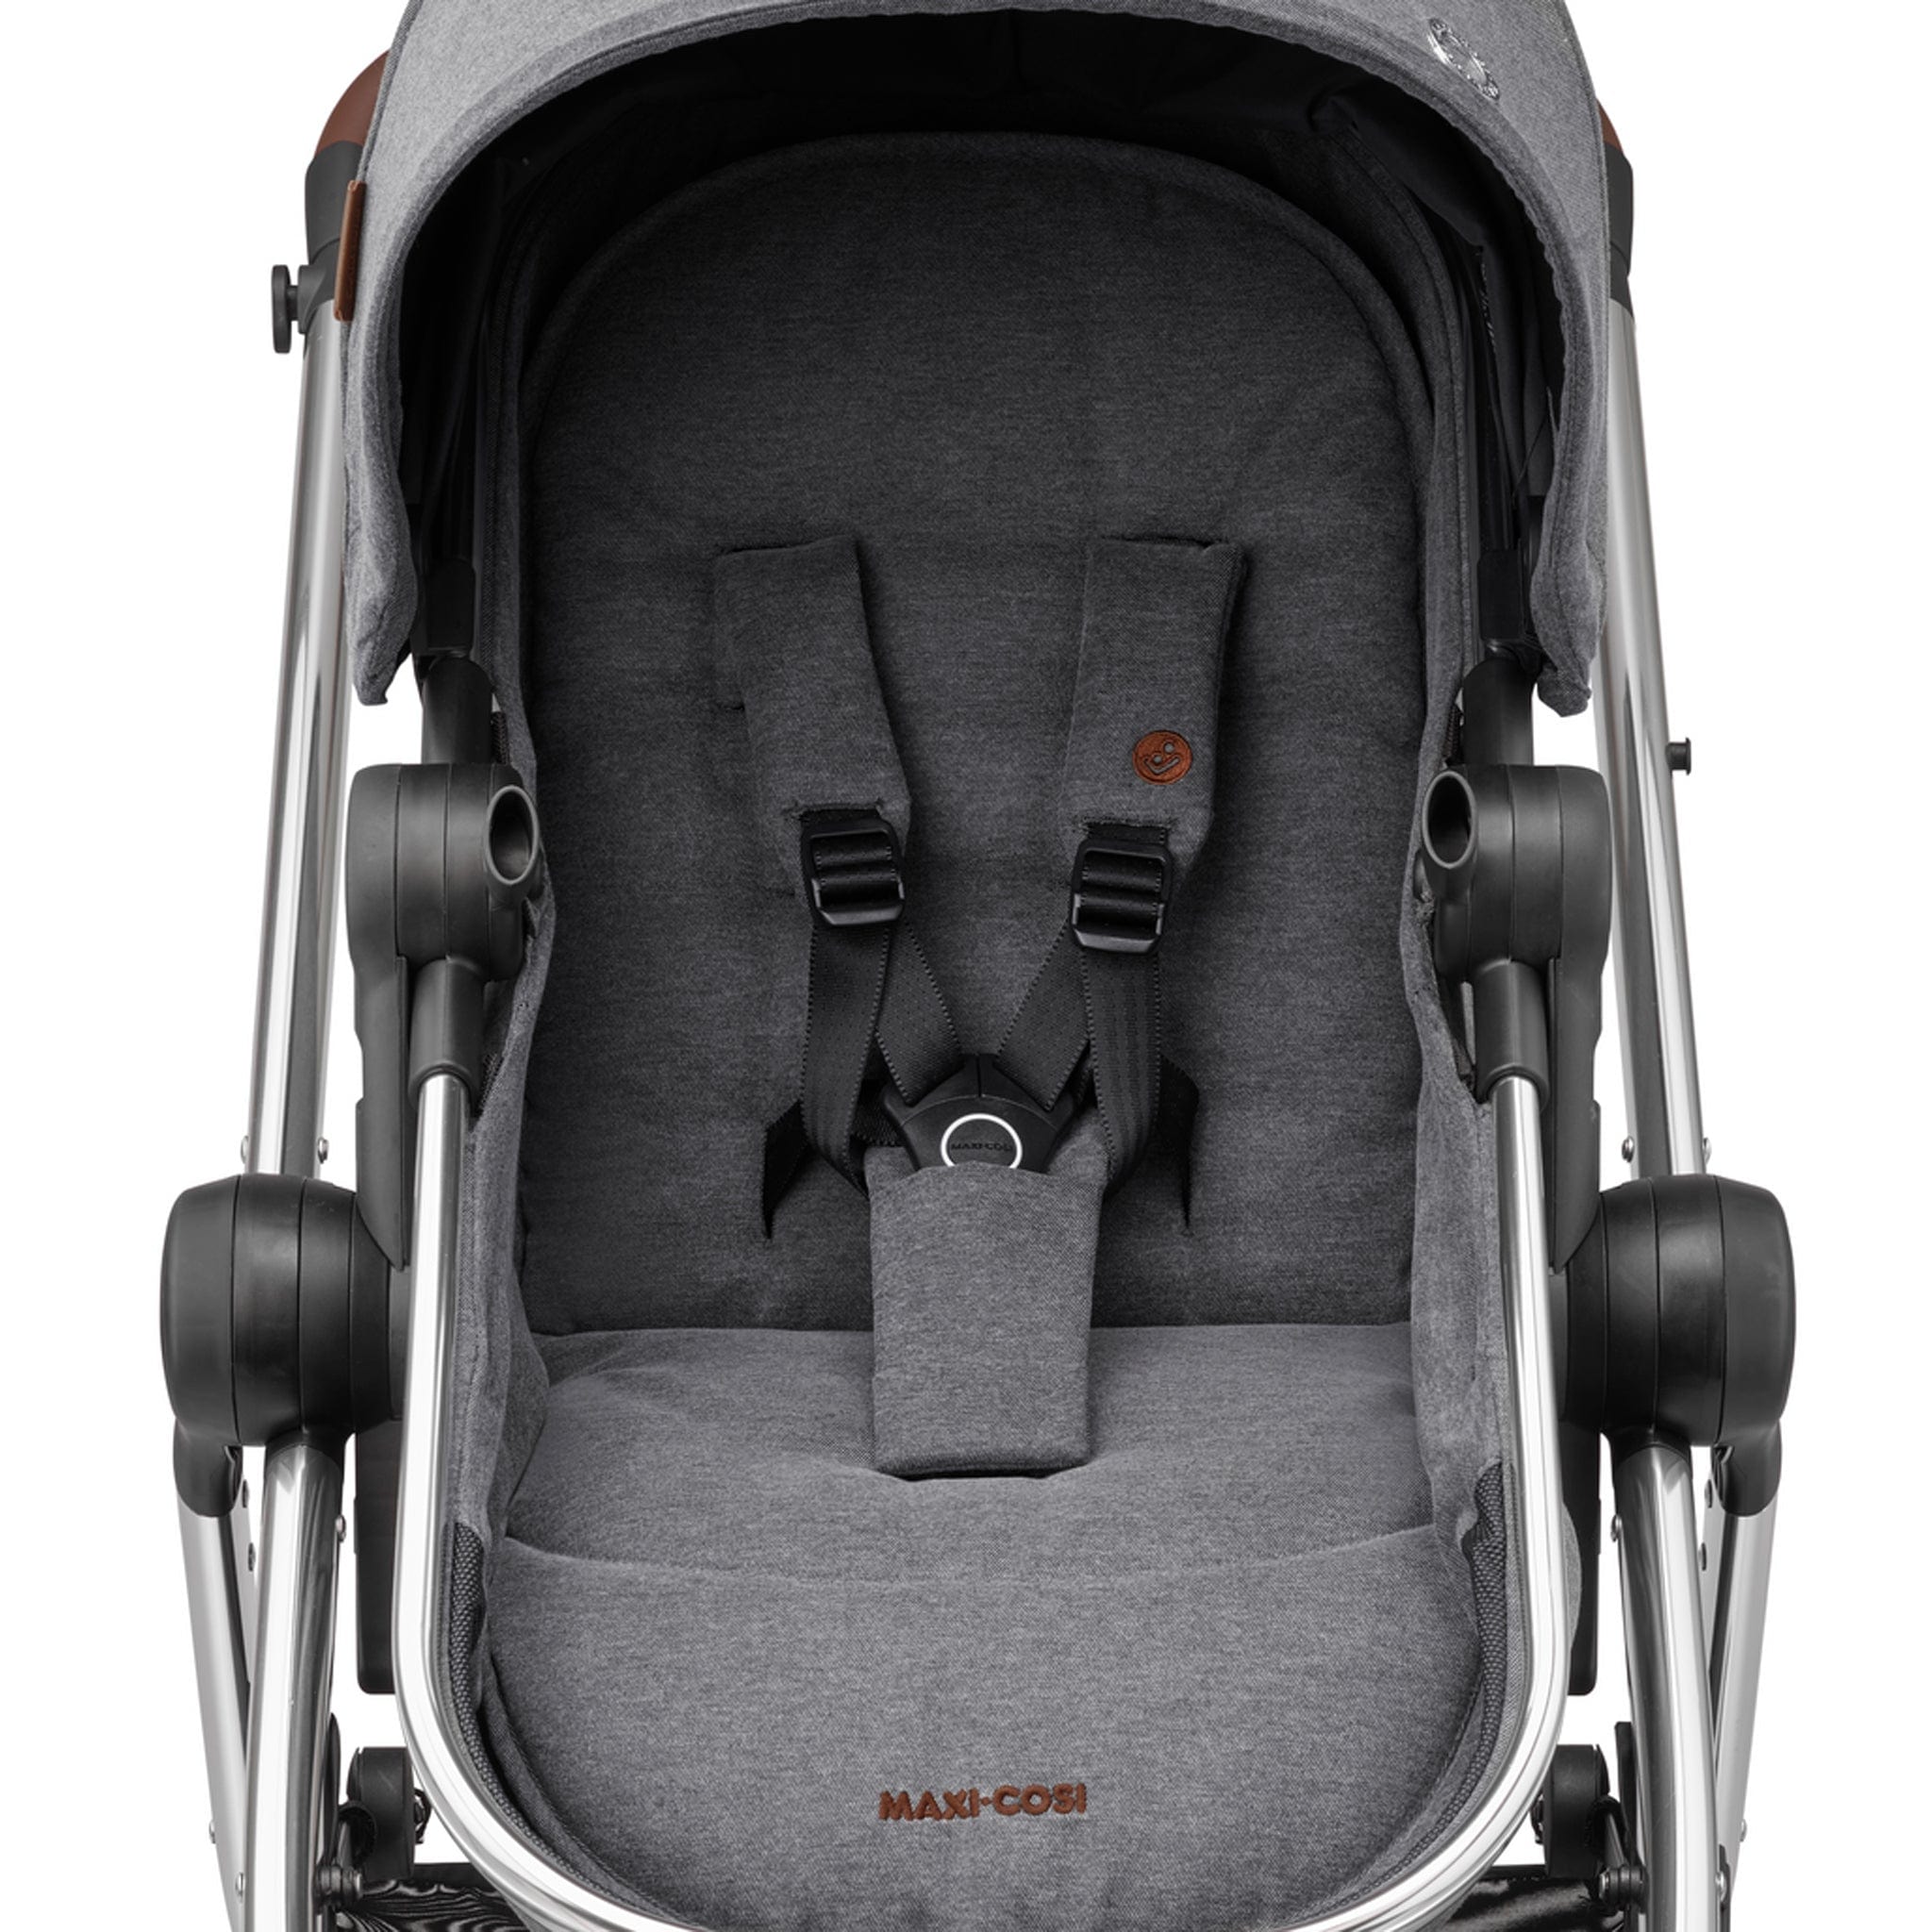 Maxi-Cosi Zelia S Trio 3-in-1 Pushchair, Foldable, Compact and Reclining  Baby Stroller with CabrioFix S i-Size Car Seat, Accessories, Changing Bag,  0 to 4 Years, Up to 22 kg, Grey : 